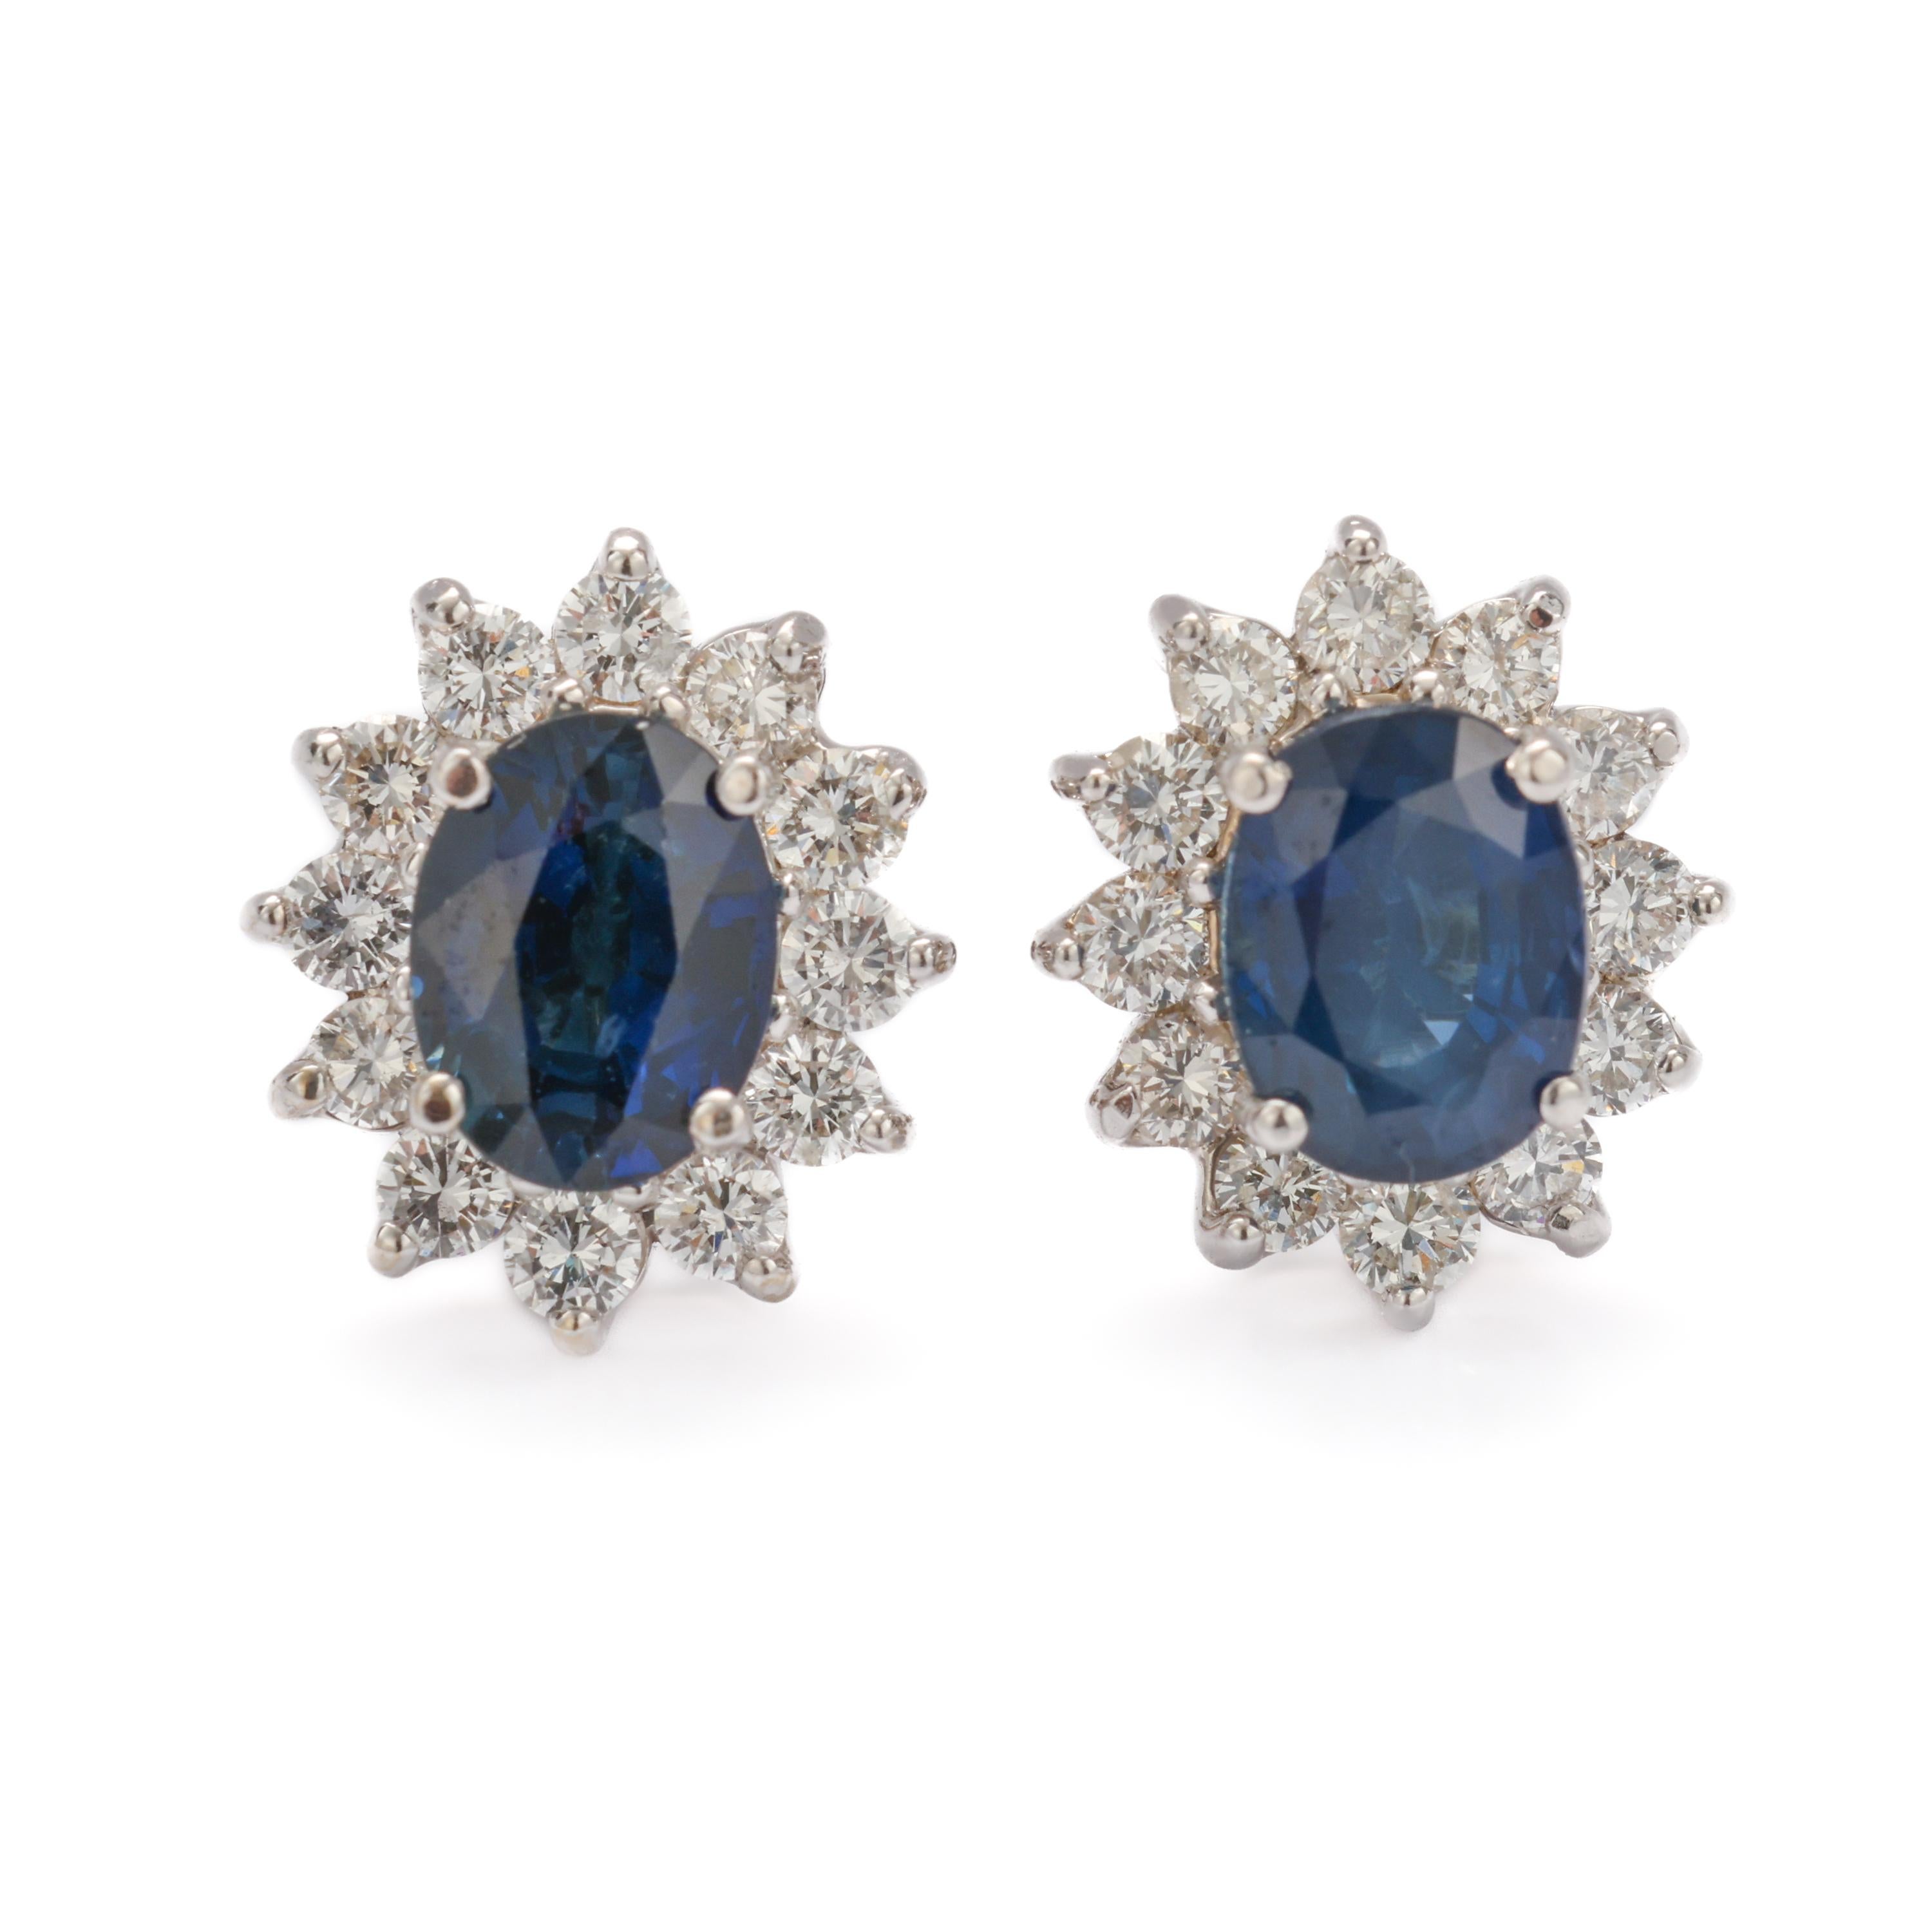 This classic pair of natural blue sapphire and diamond earrings was created in the 1990s -circa 1997- in 18K white gold. Each earring features an approximately 8mm x 6mm oval sapphire weighing slightly over one carat. Each sapphire is encircled by a